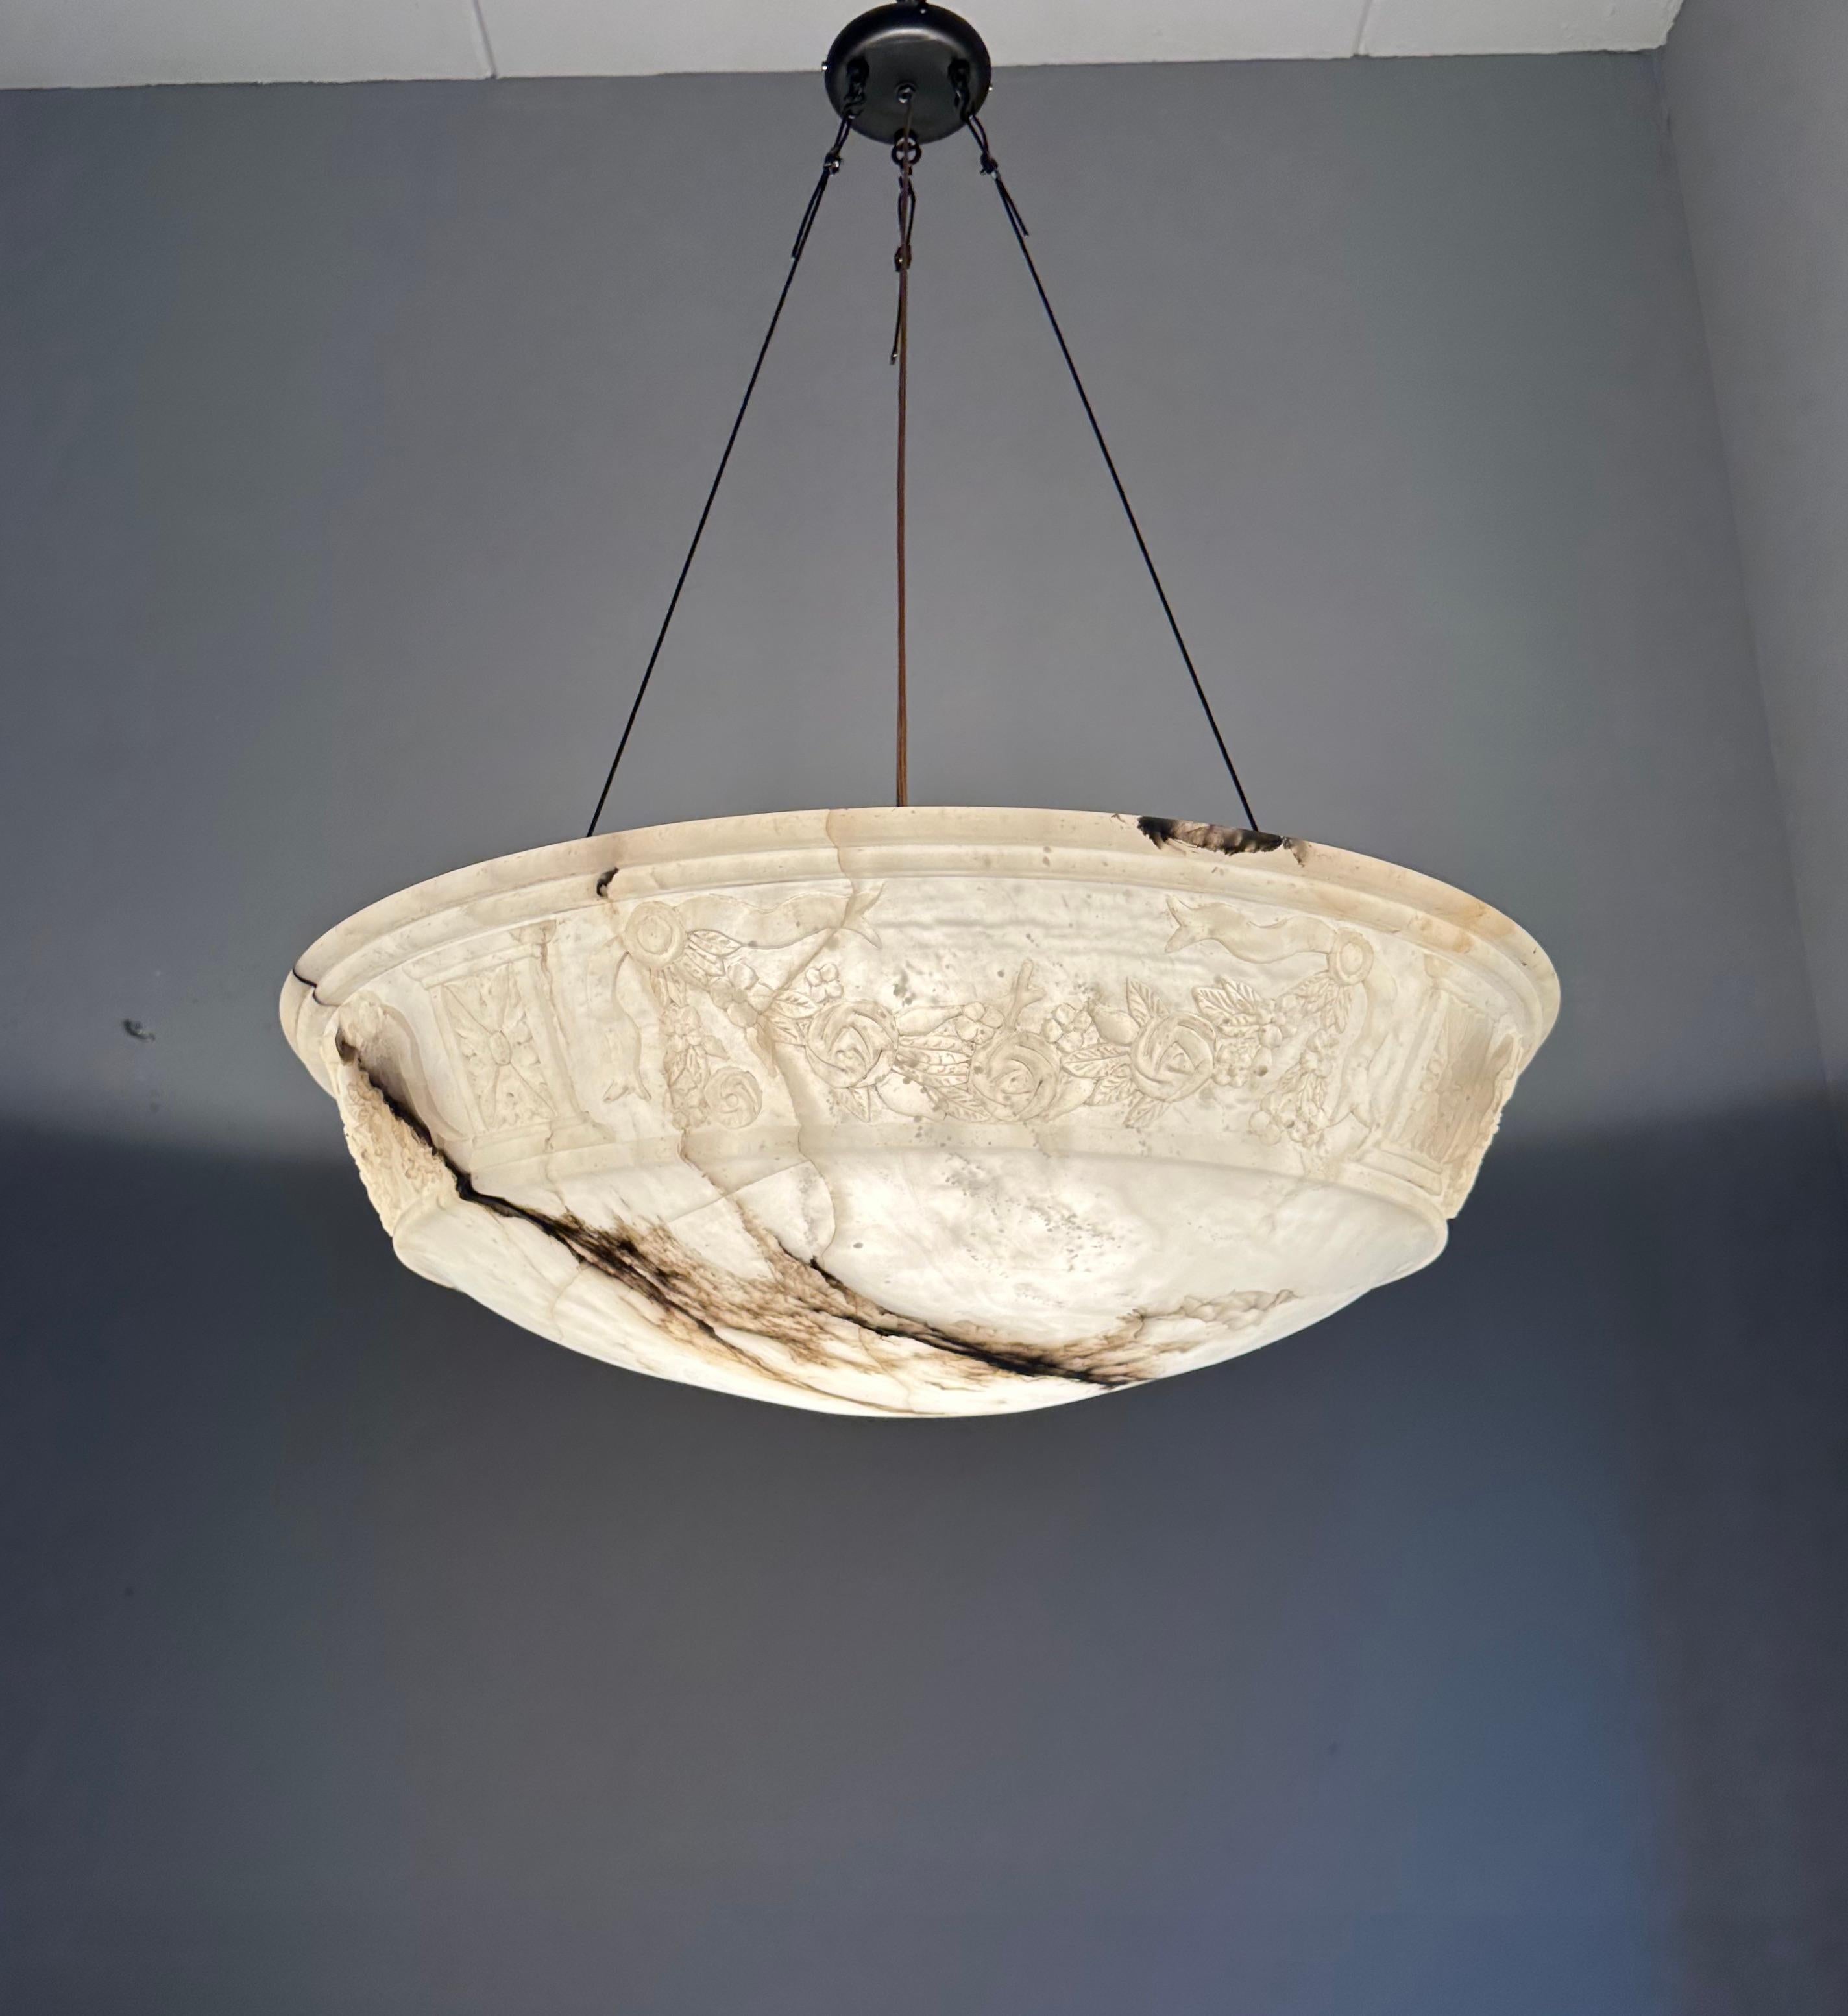 HUGE Antique Neoclassical Style White, Black Alabaster Pendant Chandelier 1 of 2 7